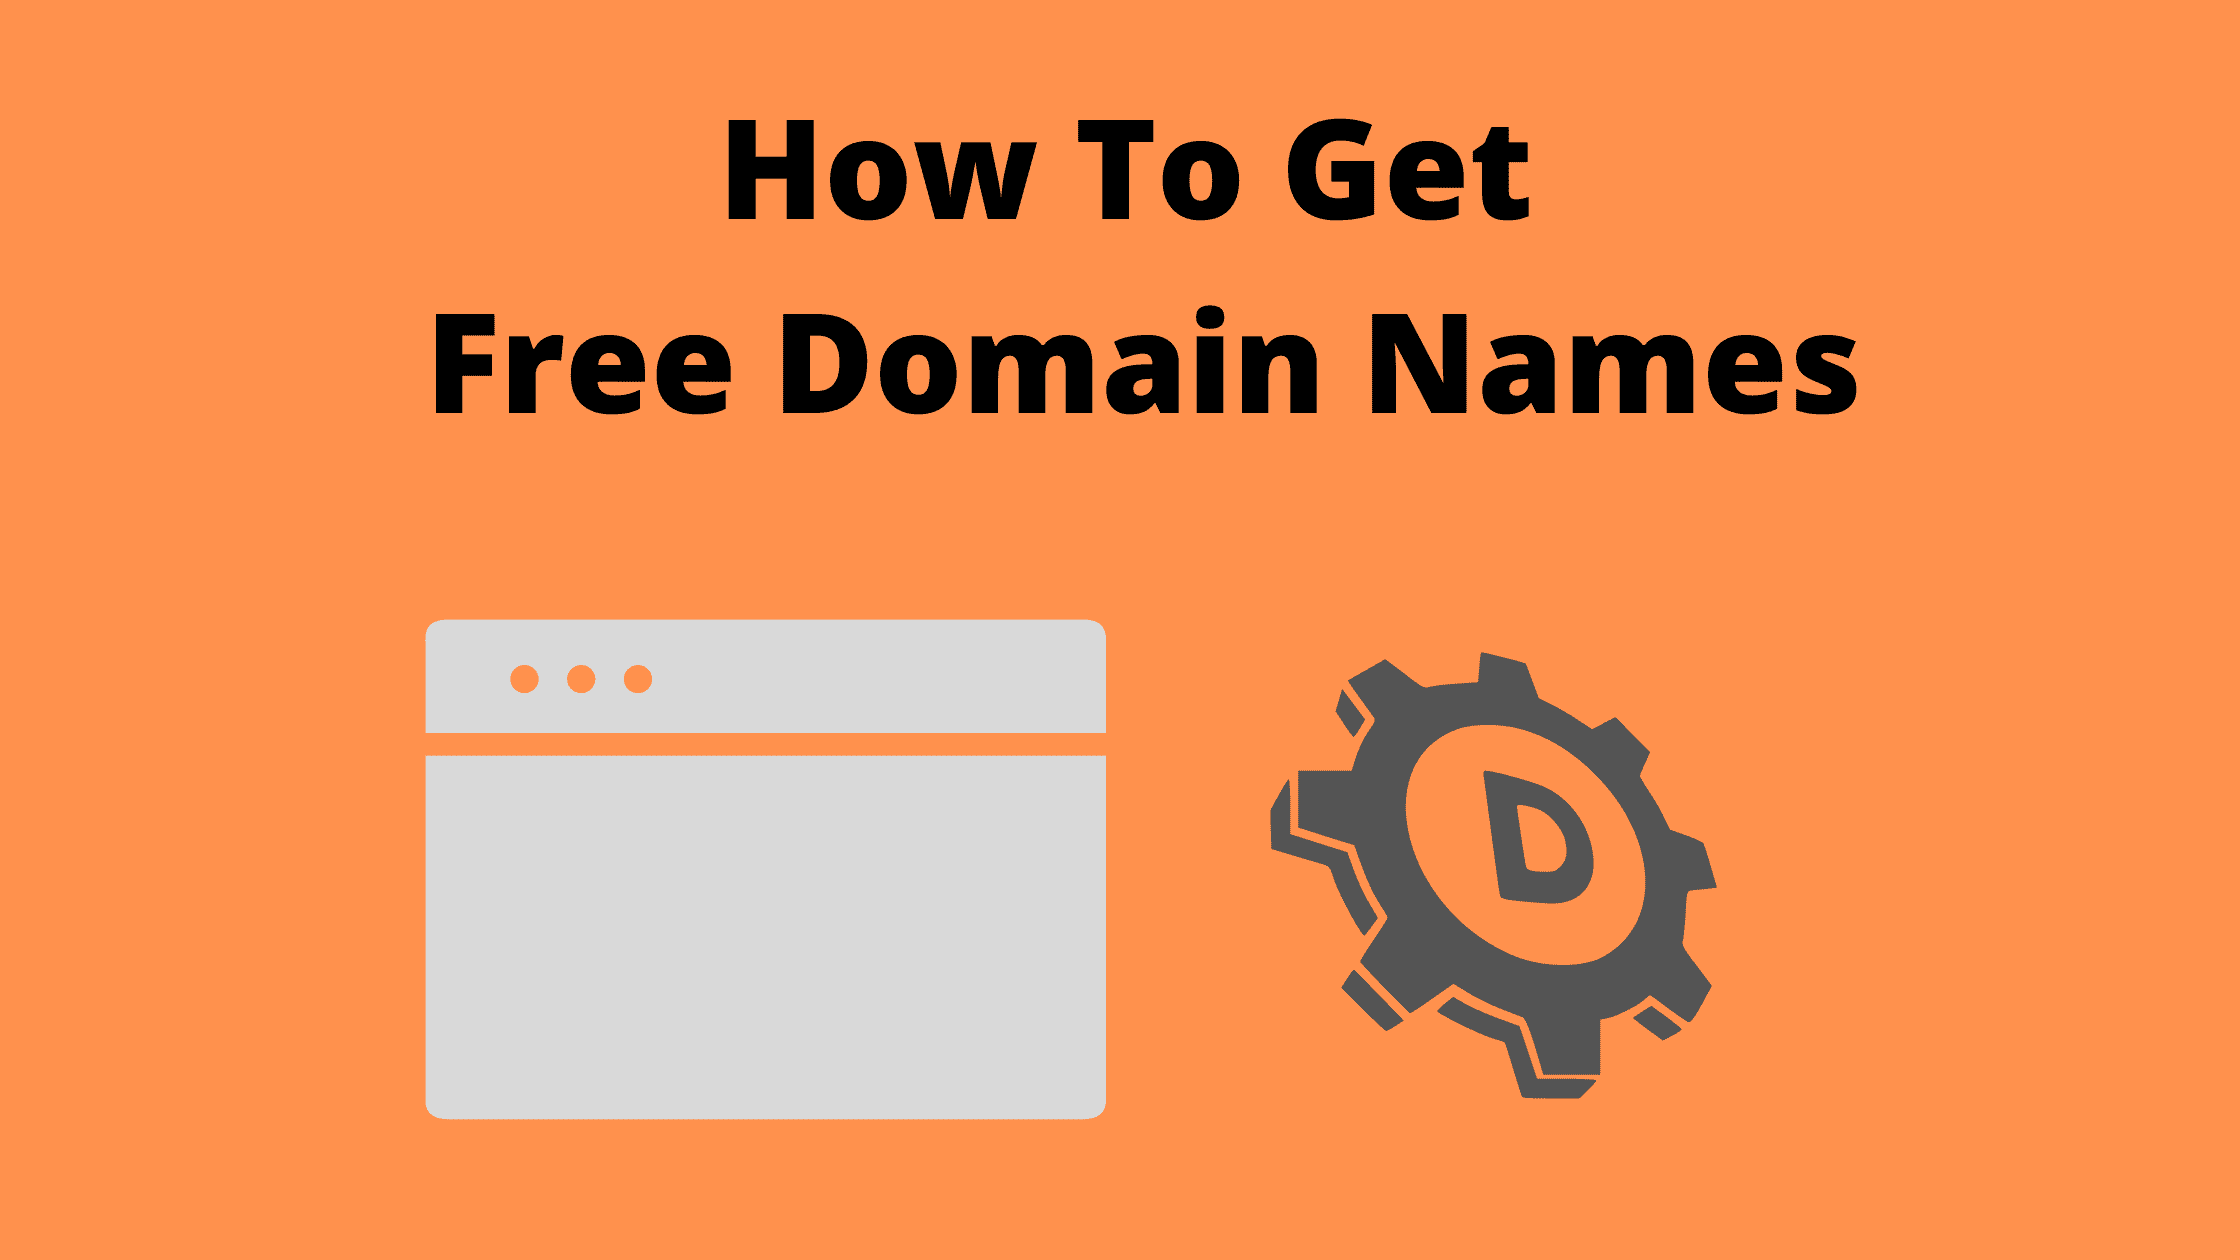 How To Get Free Domain Names